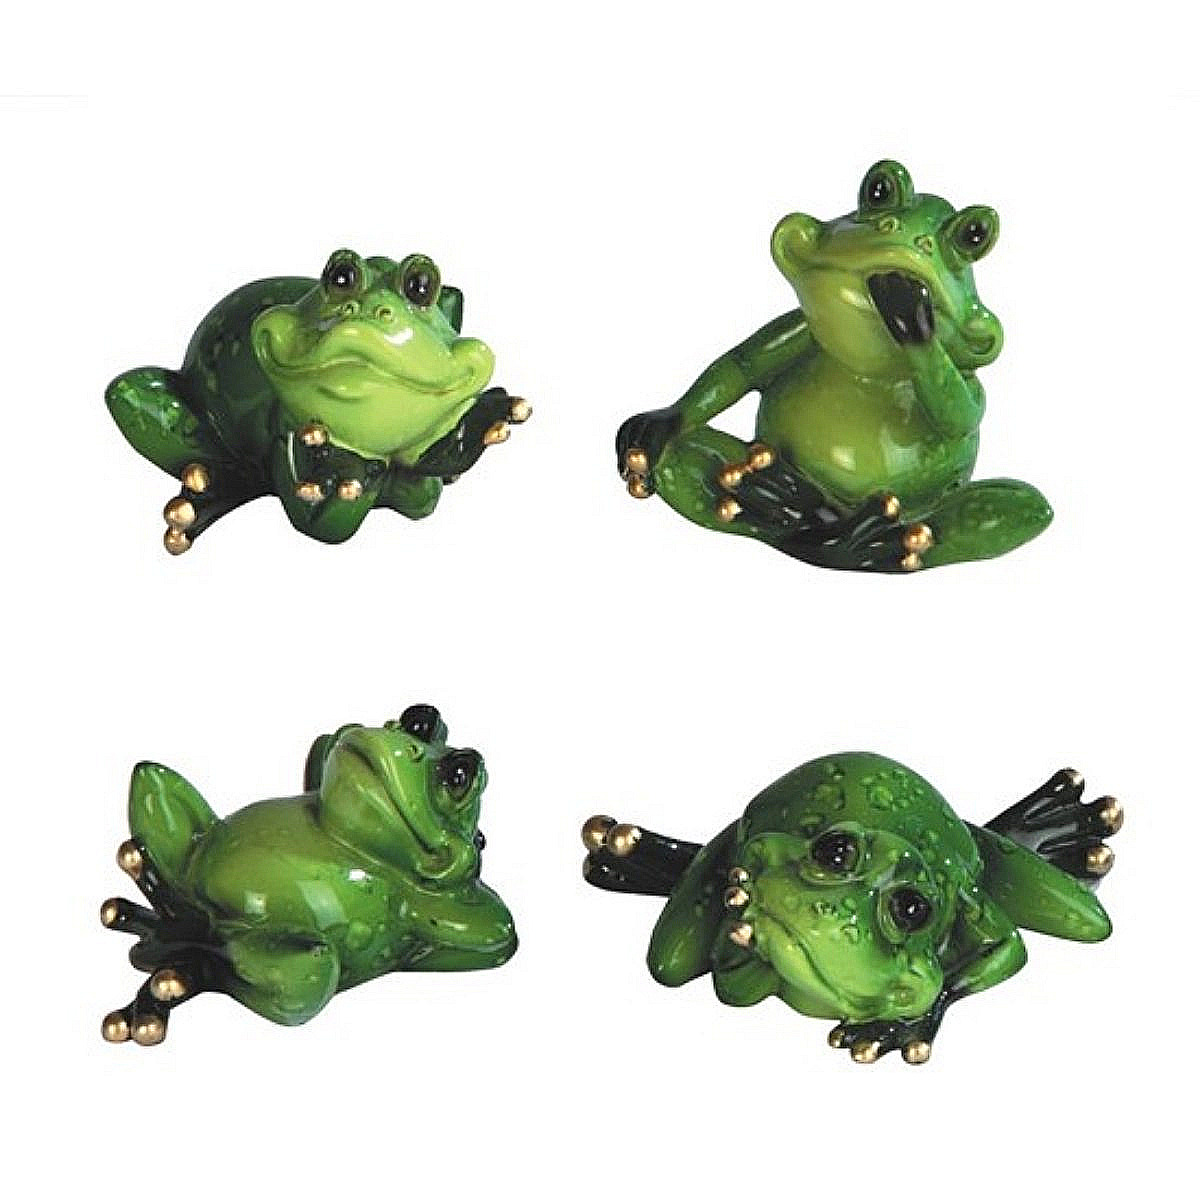 Frog Figurines in Various Poses (Set of 4)